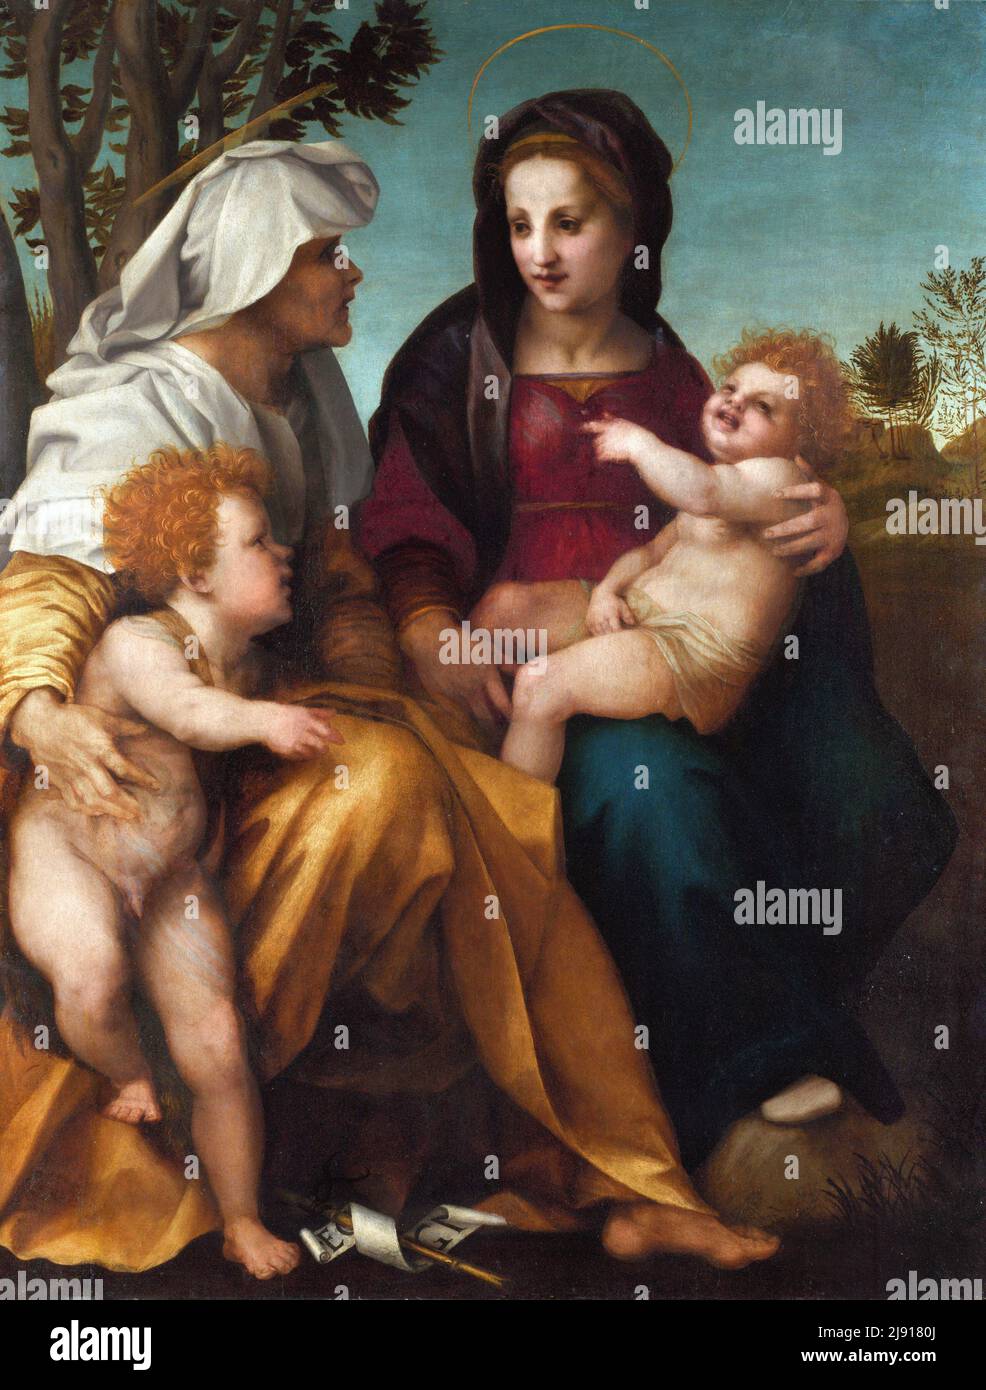 The Madonna and Child with Saint Elizabeth and Saint John the Baptist by Andrea del Sarto (Andrea d'Agnolo: 1486-1530), oil on wood, c. 1513 Stock Photo